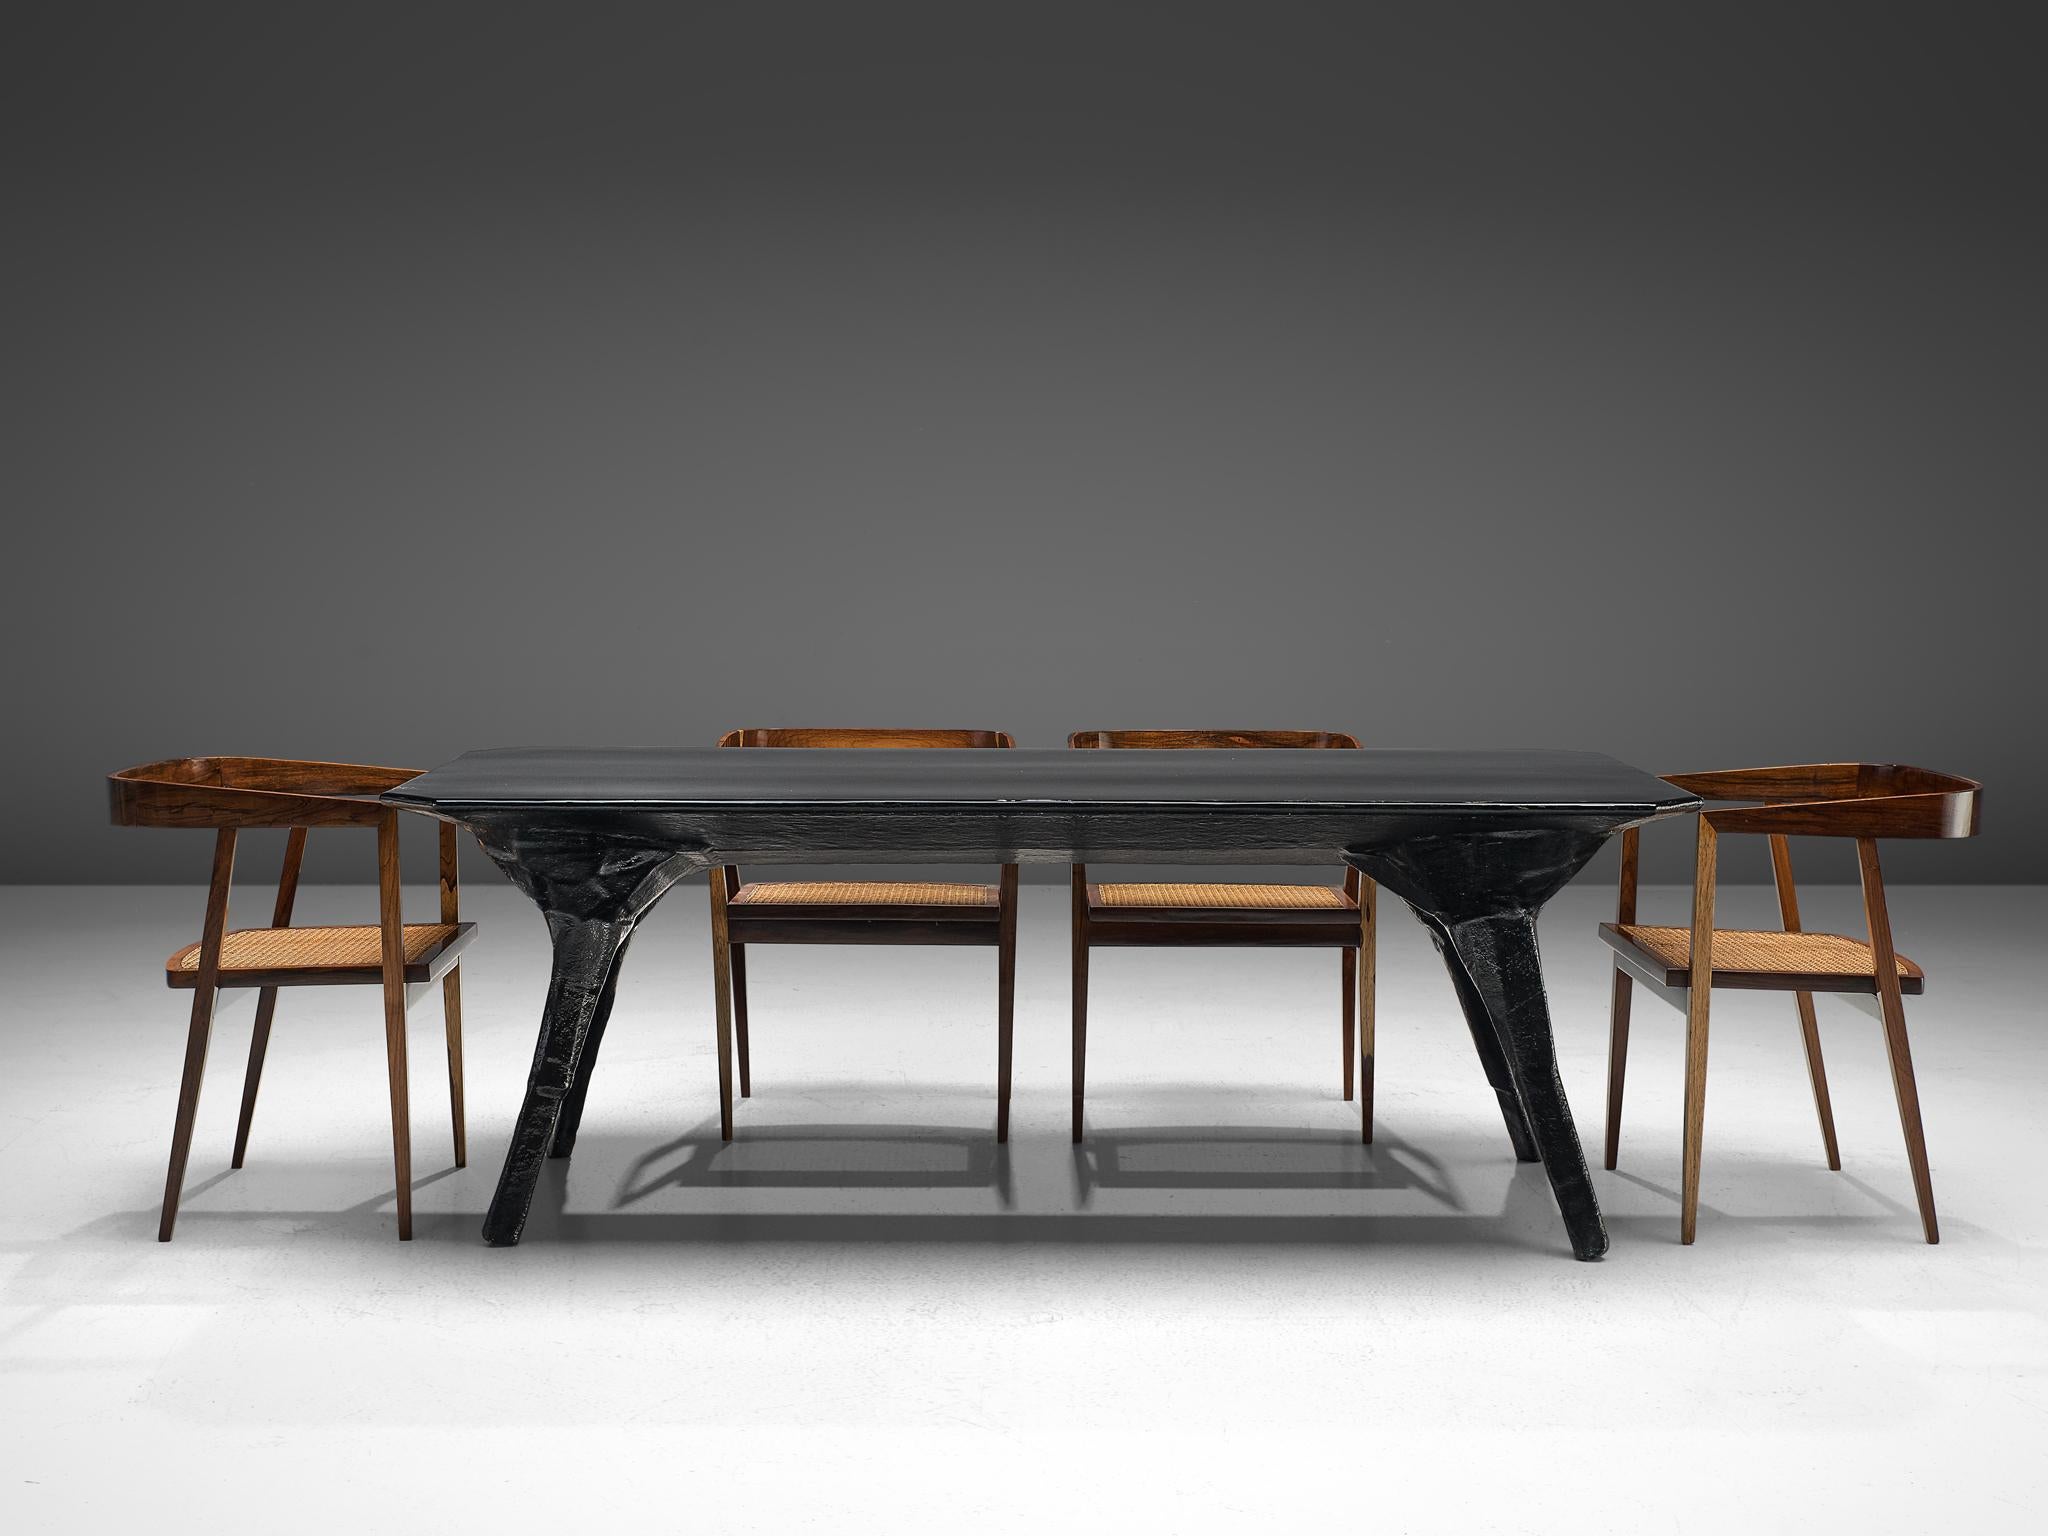 El Ultimo Grito Dining Table with Sculptural Legs 1